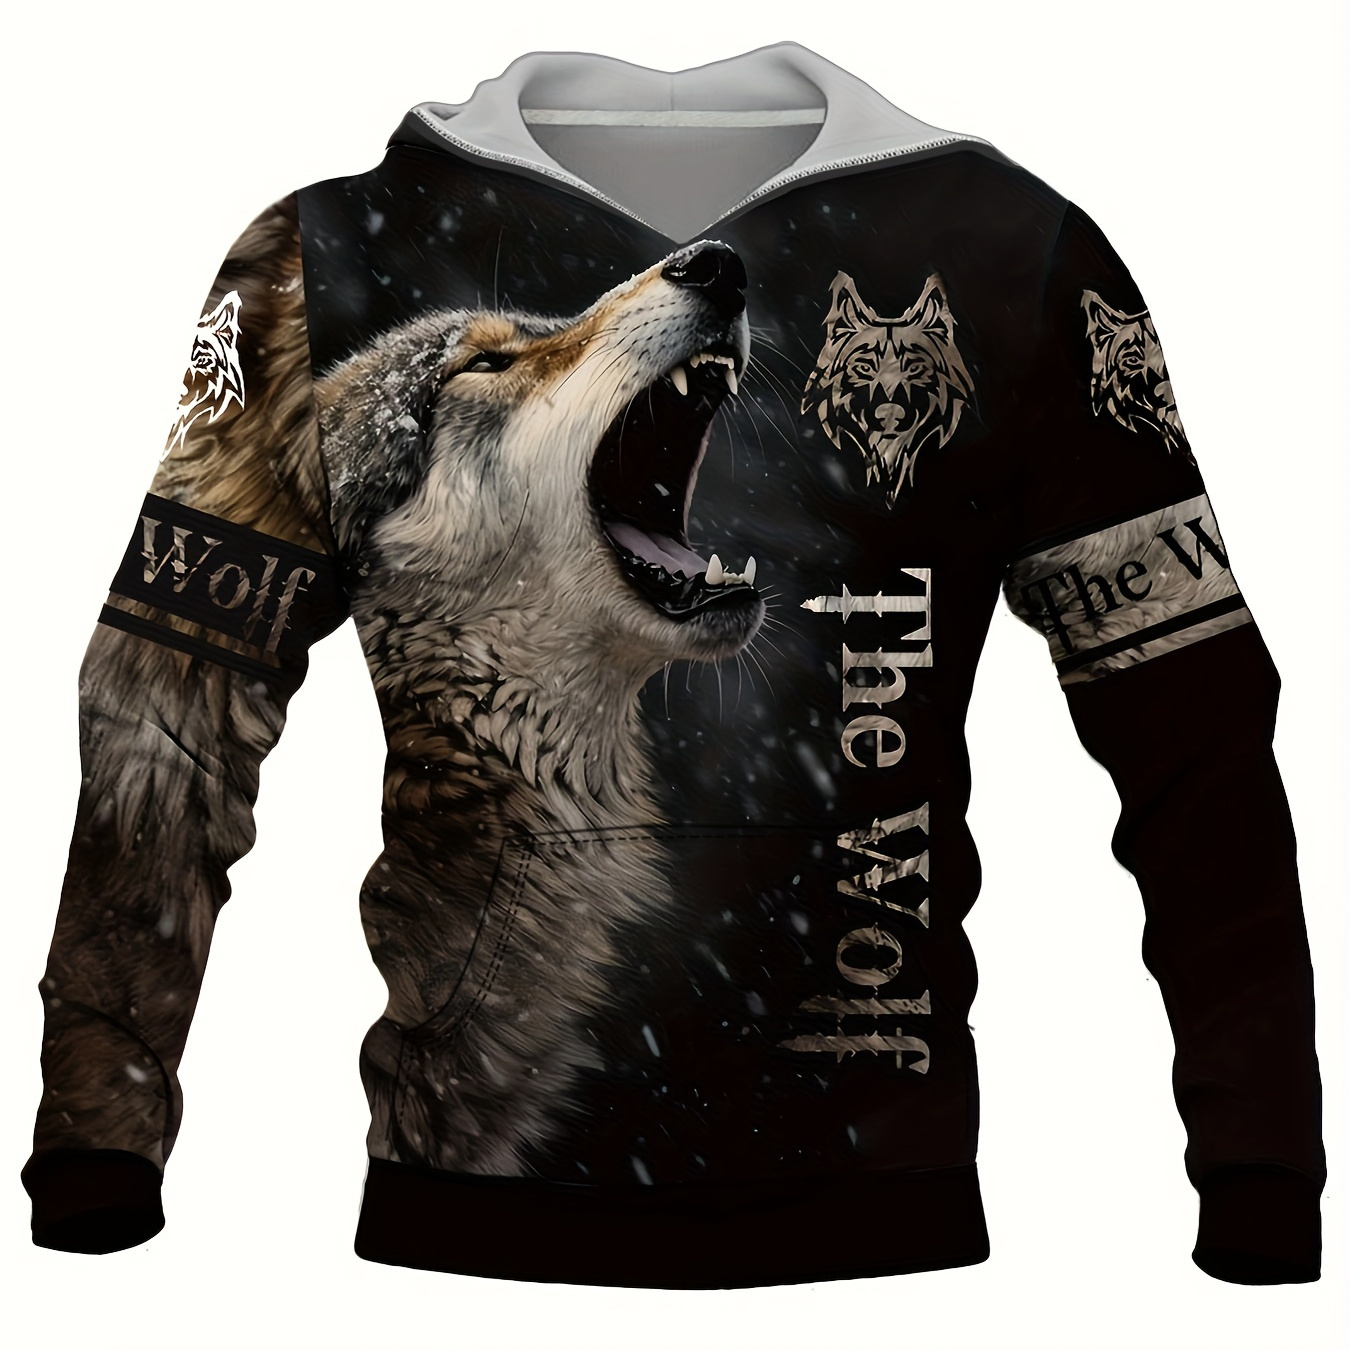 

Wolf 3d Print Hoodies For Men, Graphic Hoodie With Kangaroo Pocket, Comfy Loose Trendy Hooded Pullover, Mens Clothing For Autumn Winter